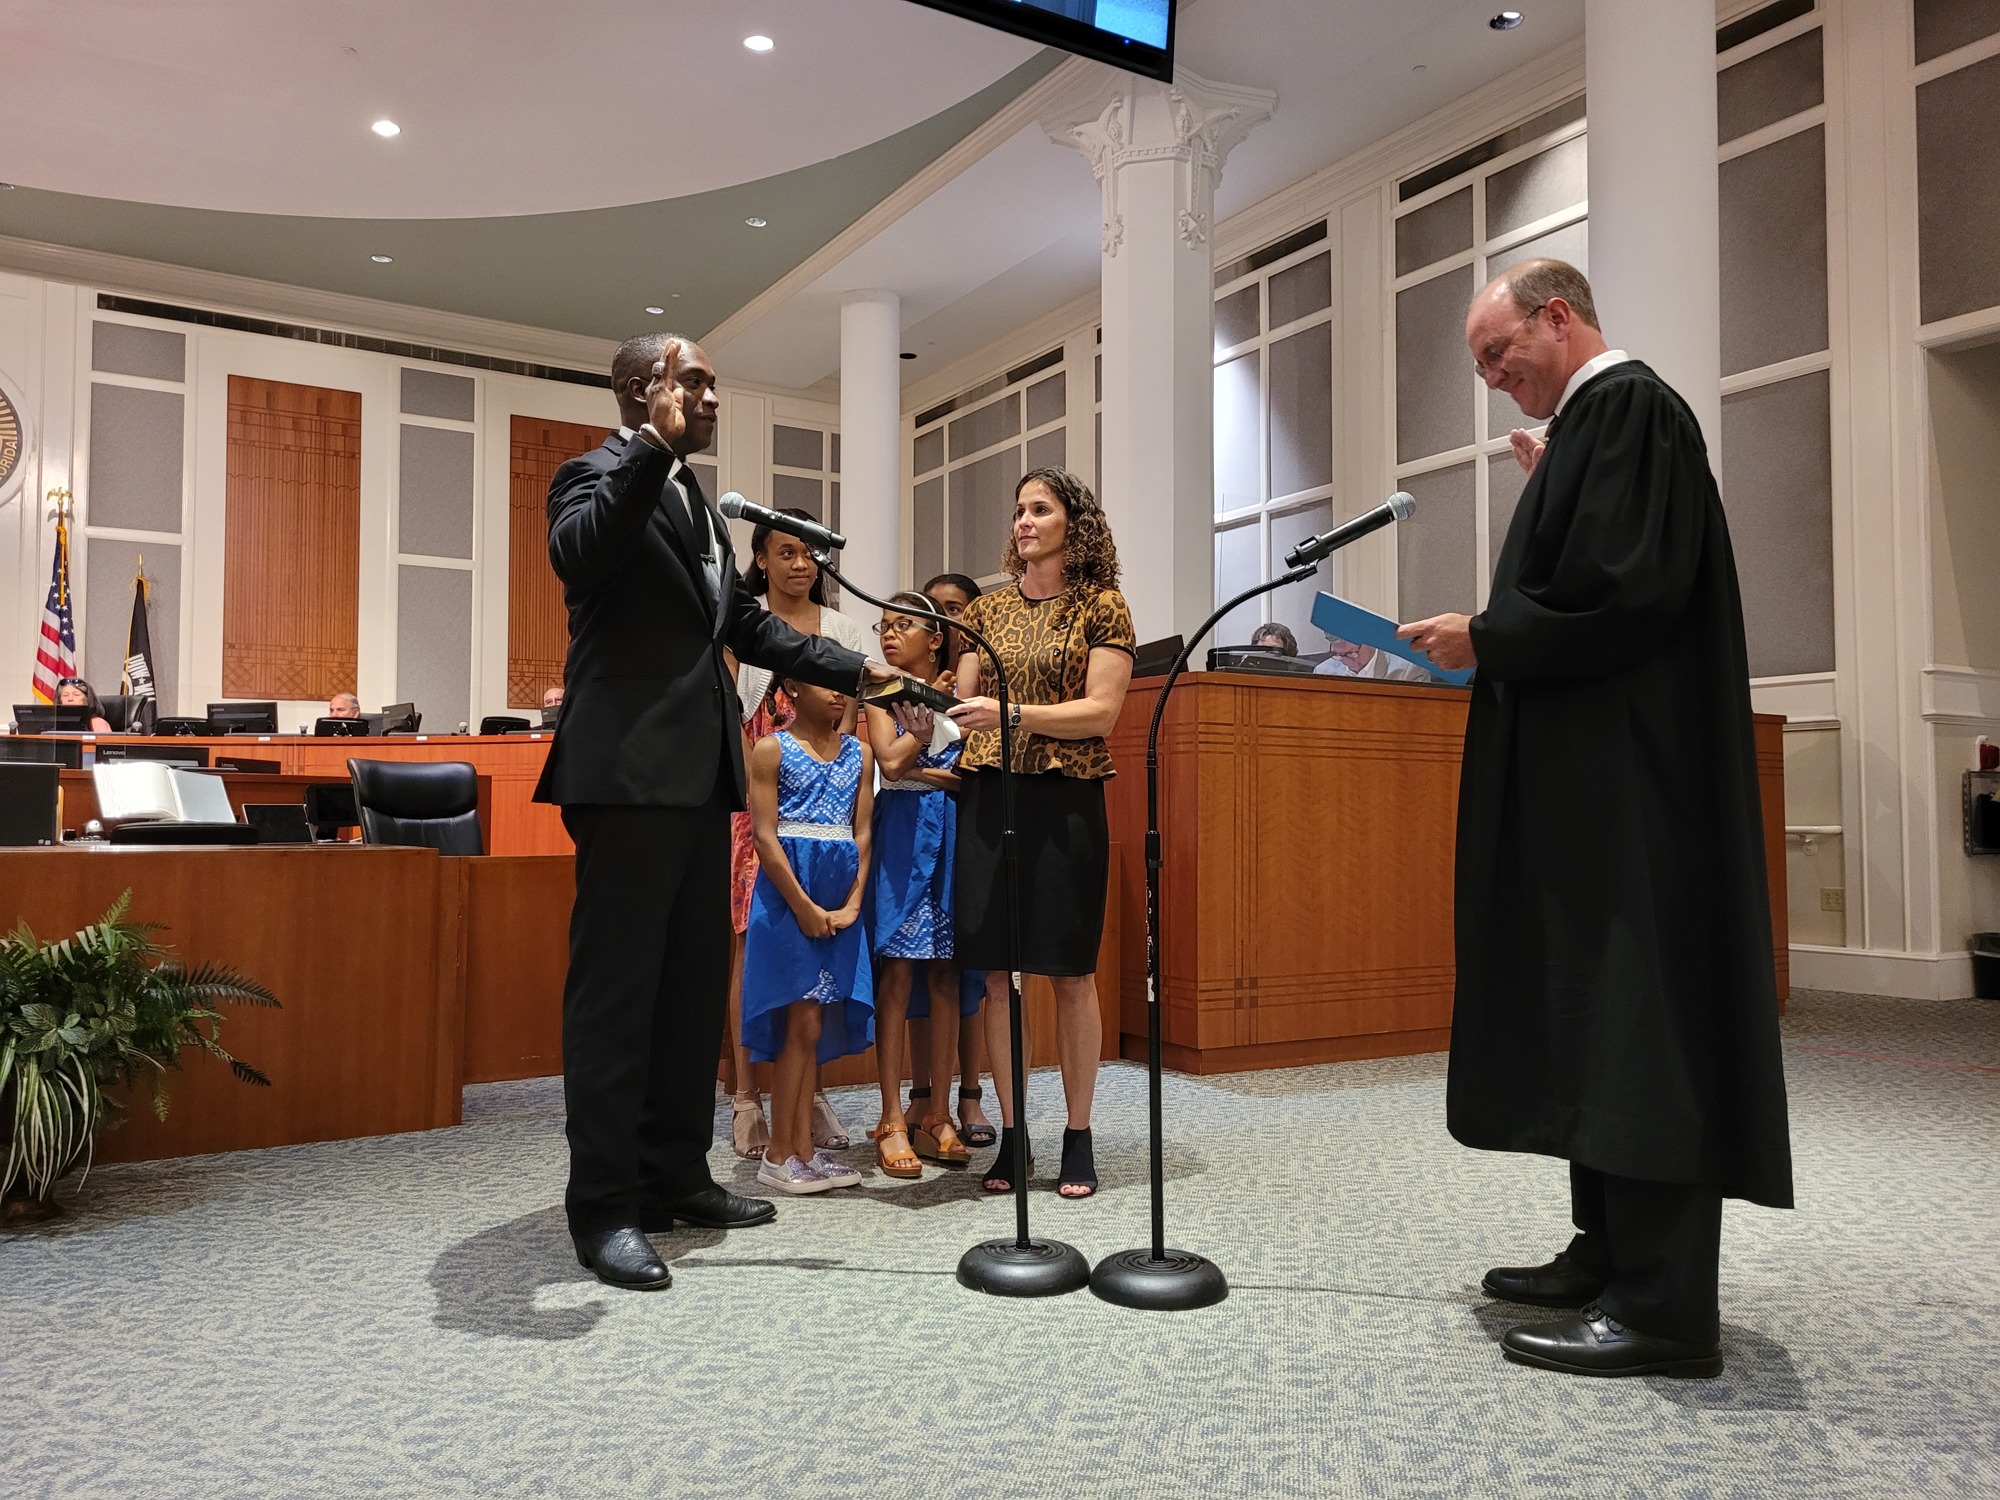 Terrance Freeman is sworn in as Council vice president with his wife, Rachel Freeman, holding the Bible. Witnessing are his daughters Evie, Teryn, Patricia and Lyndee Freeman. Judge R. Lee Smith administered the oath of office.